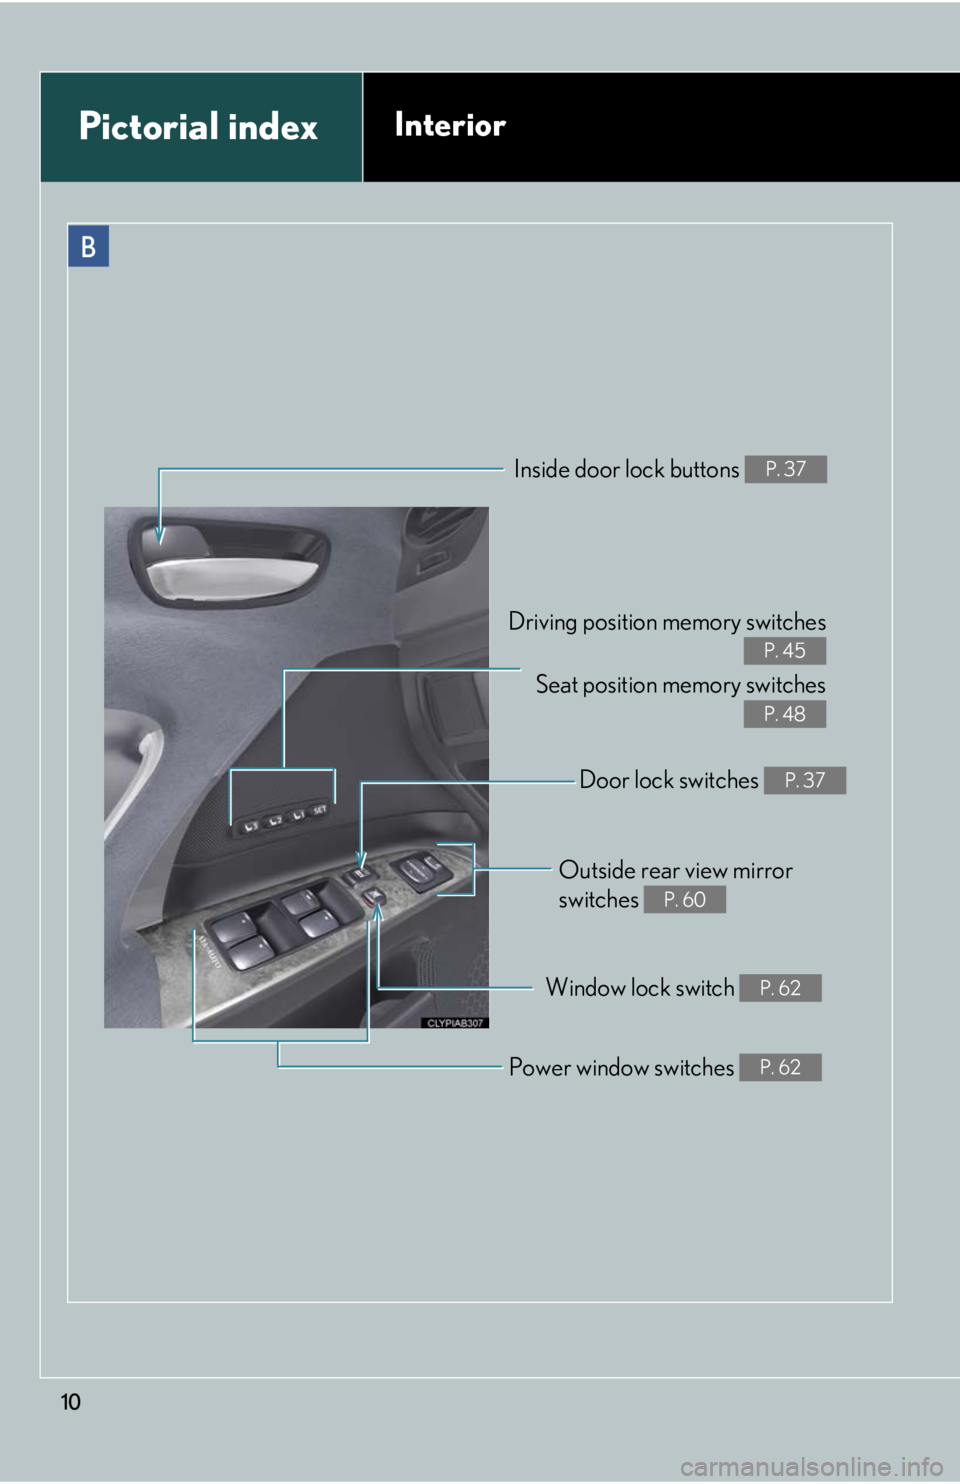 Lexus IS F 2008  Audio/video System / LEXUS 2008 IS F OWNERS MANUAL (OM53714U) 10
B
Driving position memory switchesSeat position  memory switches
P. 45
P. 48
Inside door lock buttons P. 37
Outside rear view mirror 
switches 
P. 60
Window lock switch P. 62
Power window switches 